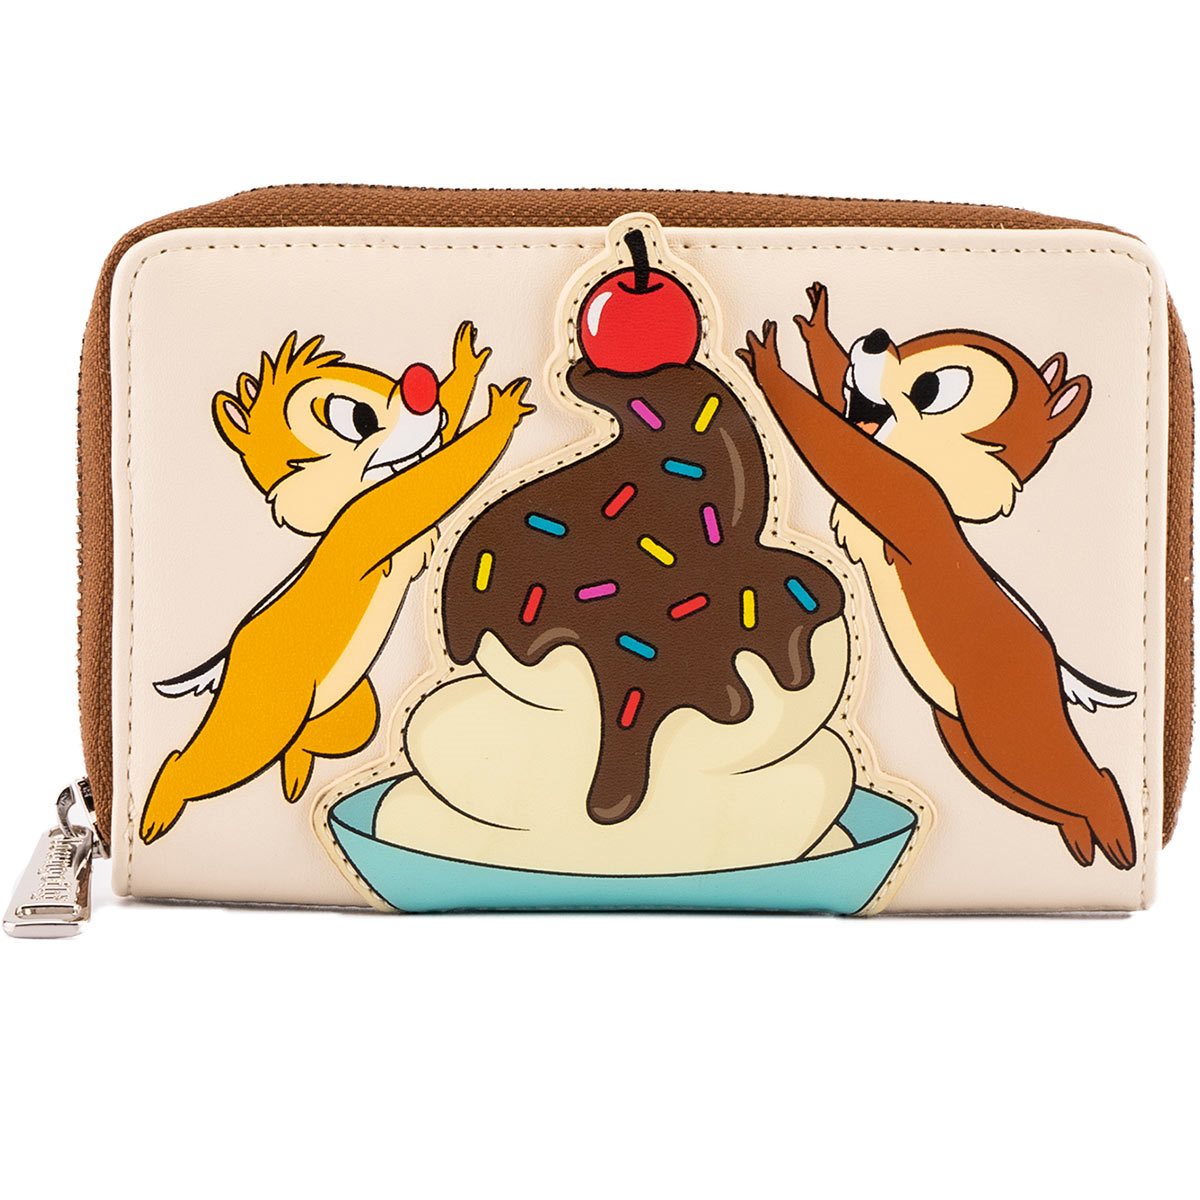 CHIP AND DALE CHERRY ON TOP ZIP-AROUND LOUNGEFLY WALLET